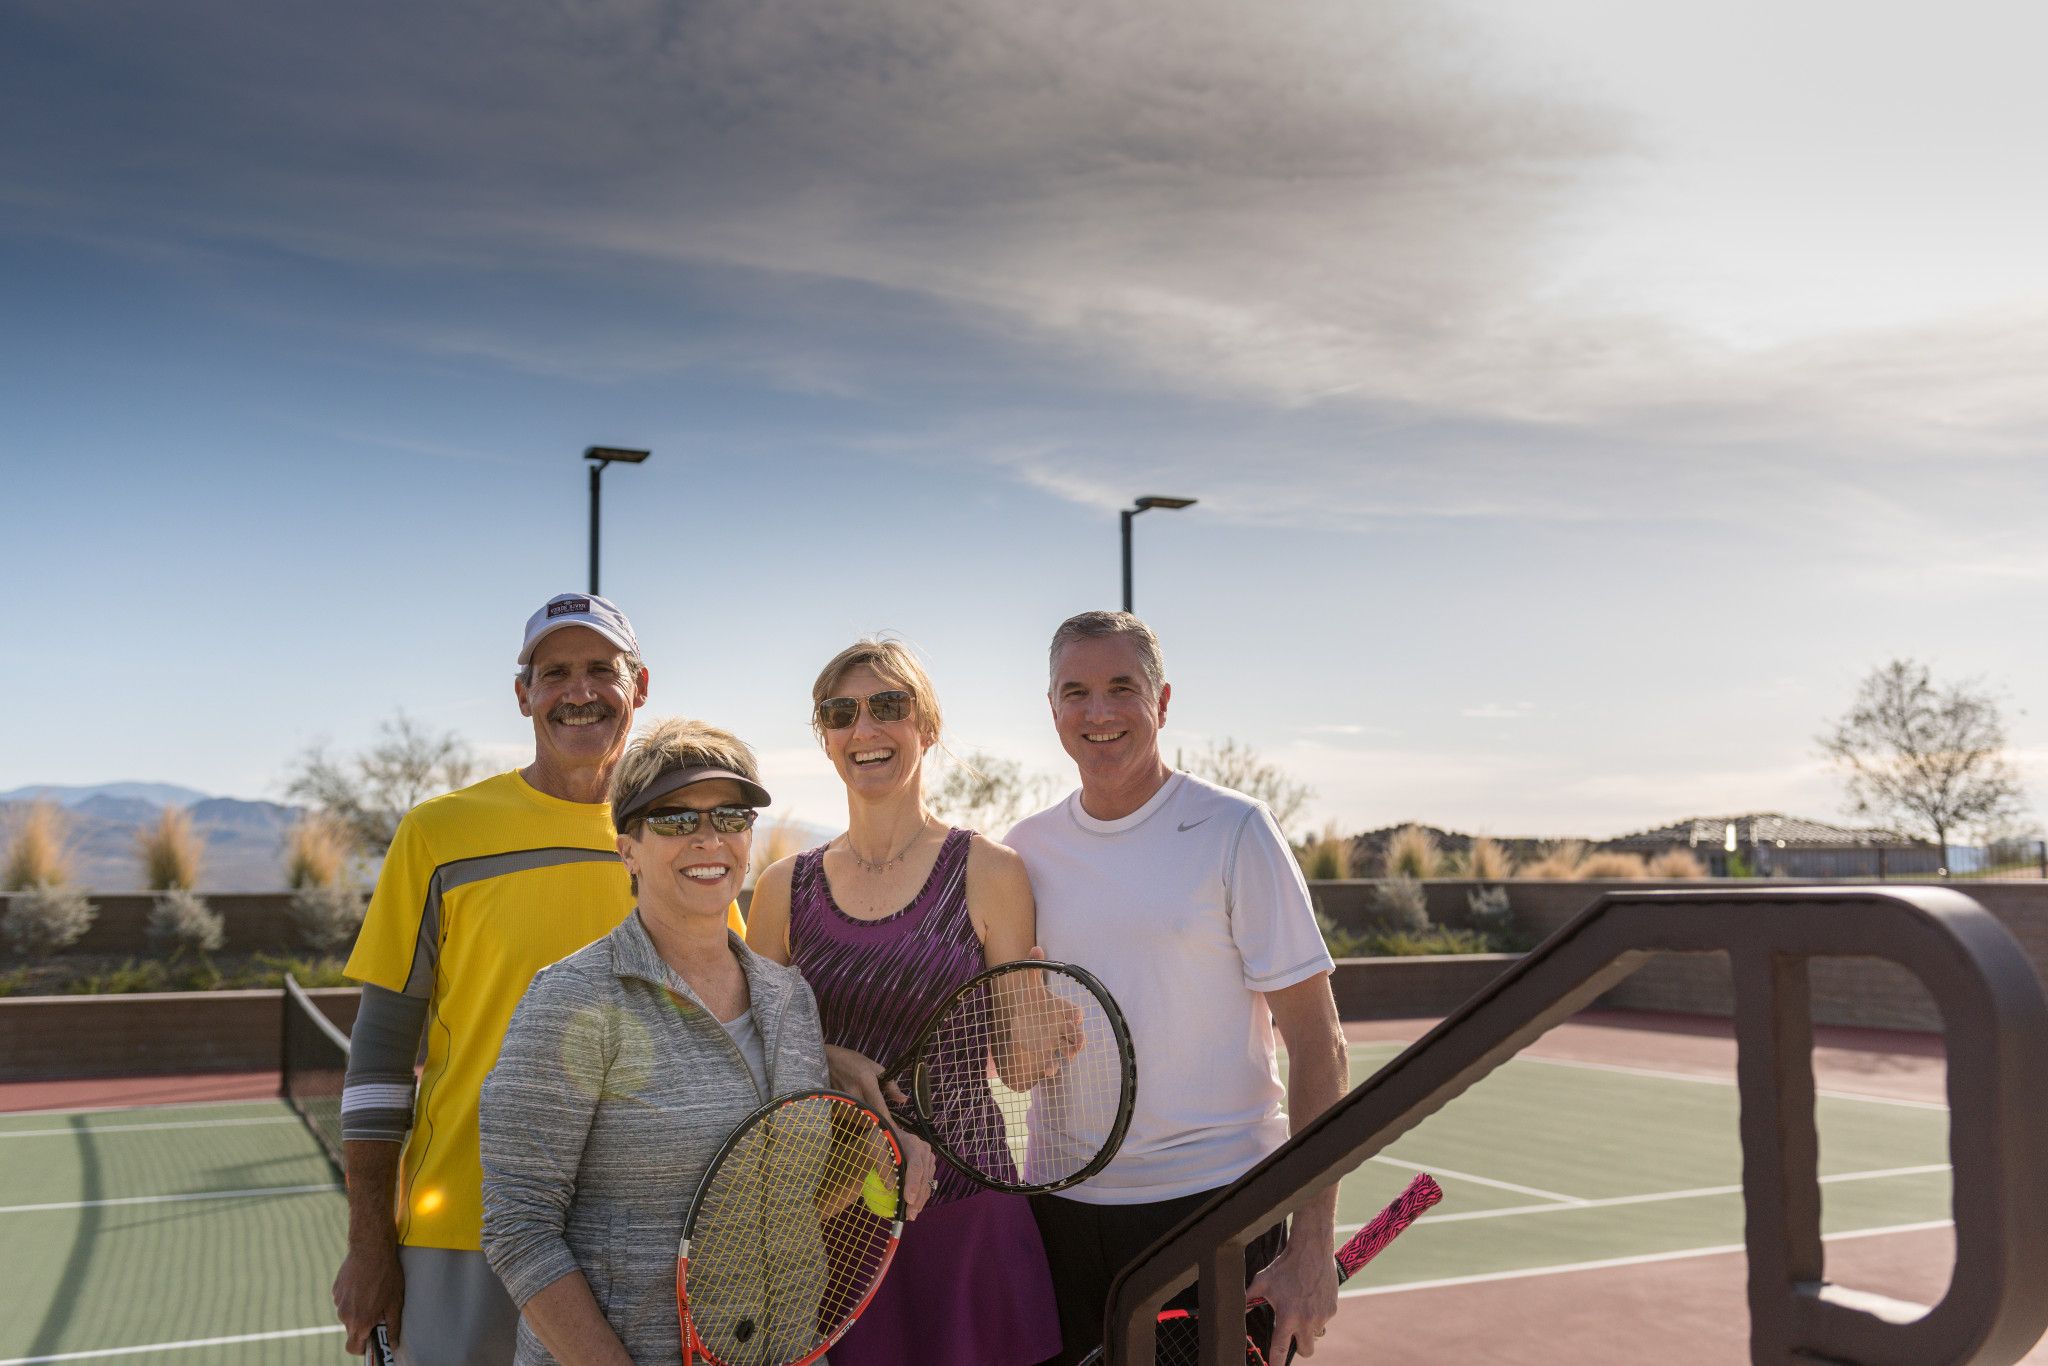 Trilogy Homeowners at Sport Courts